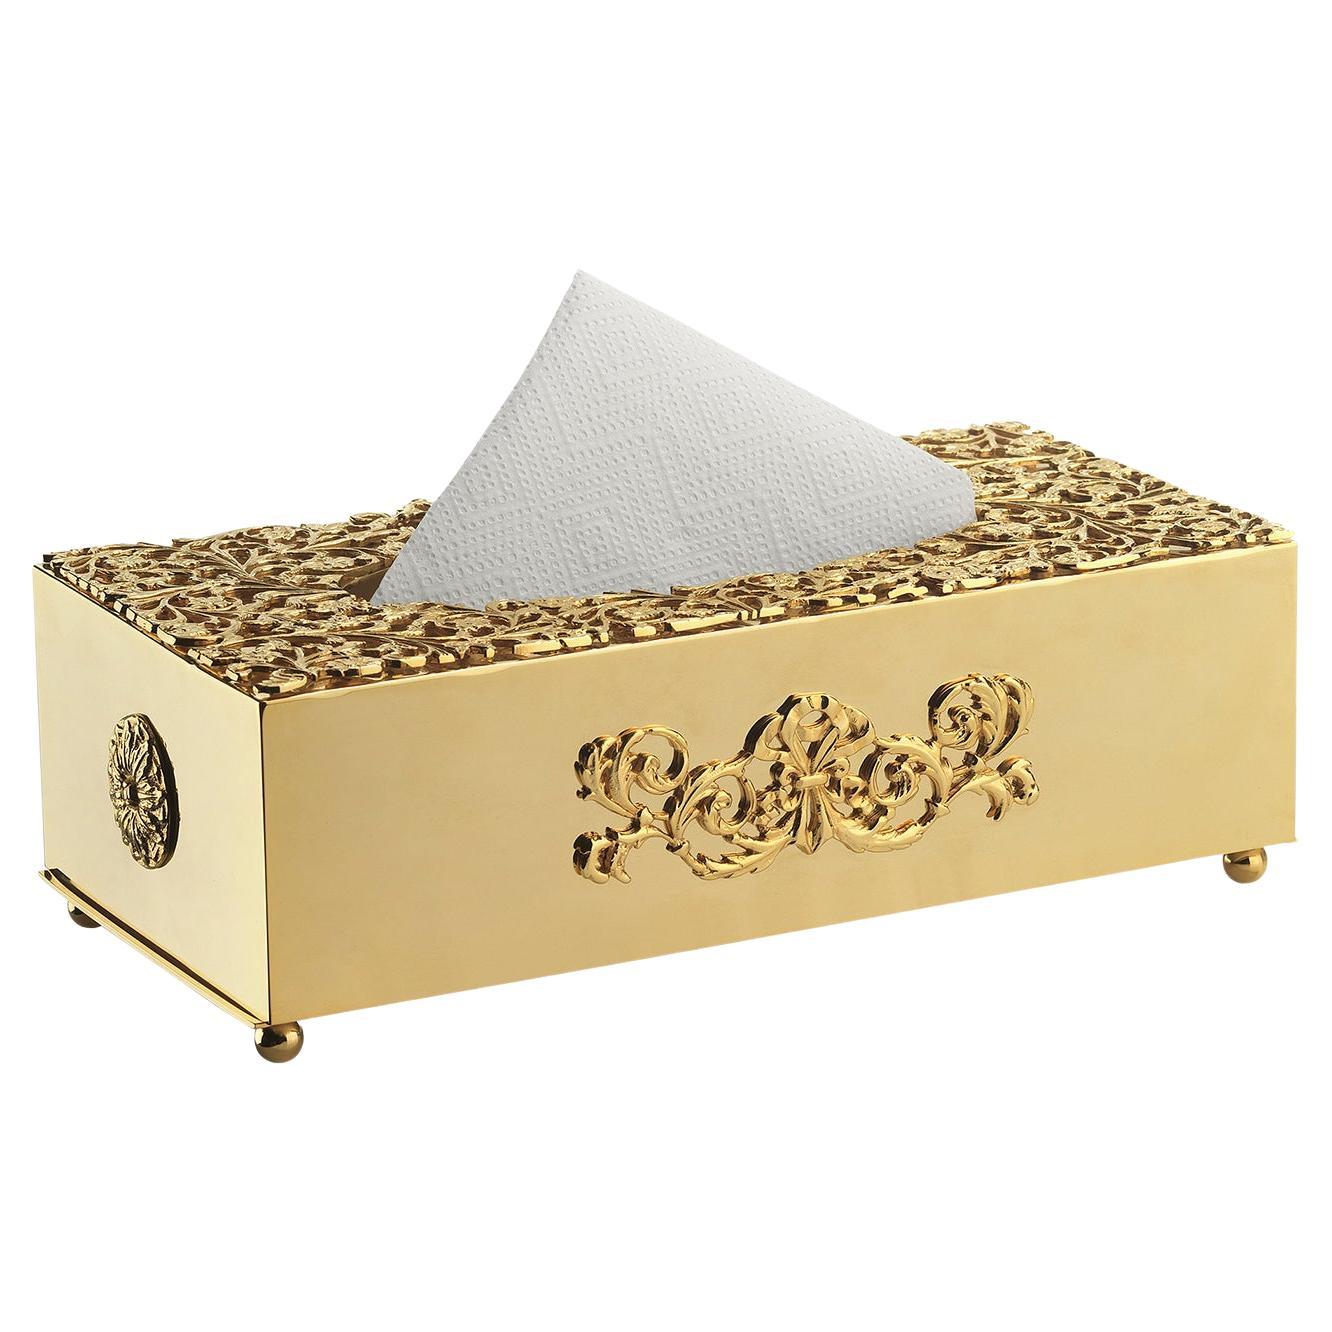 Golden Footed Tissue Box With Classic Ornaments